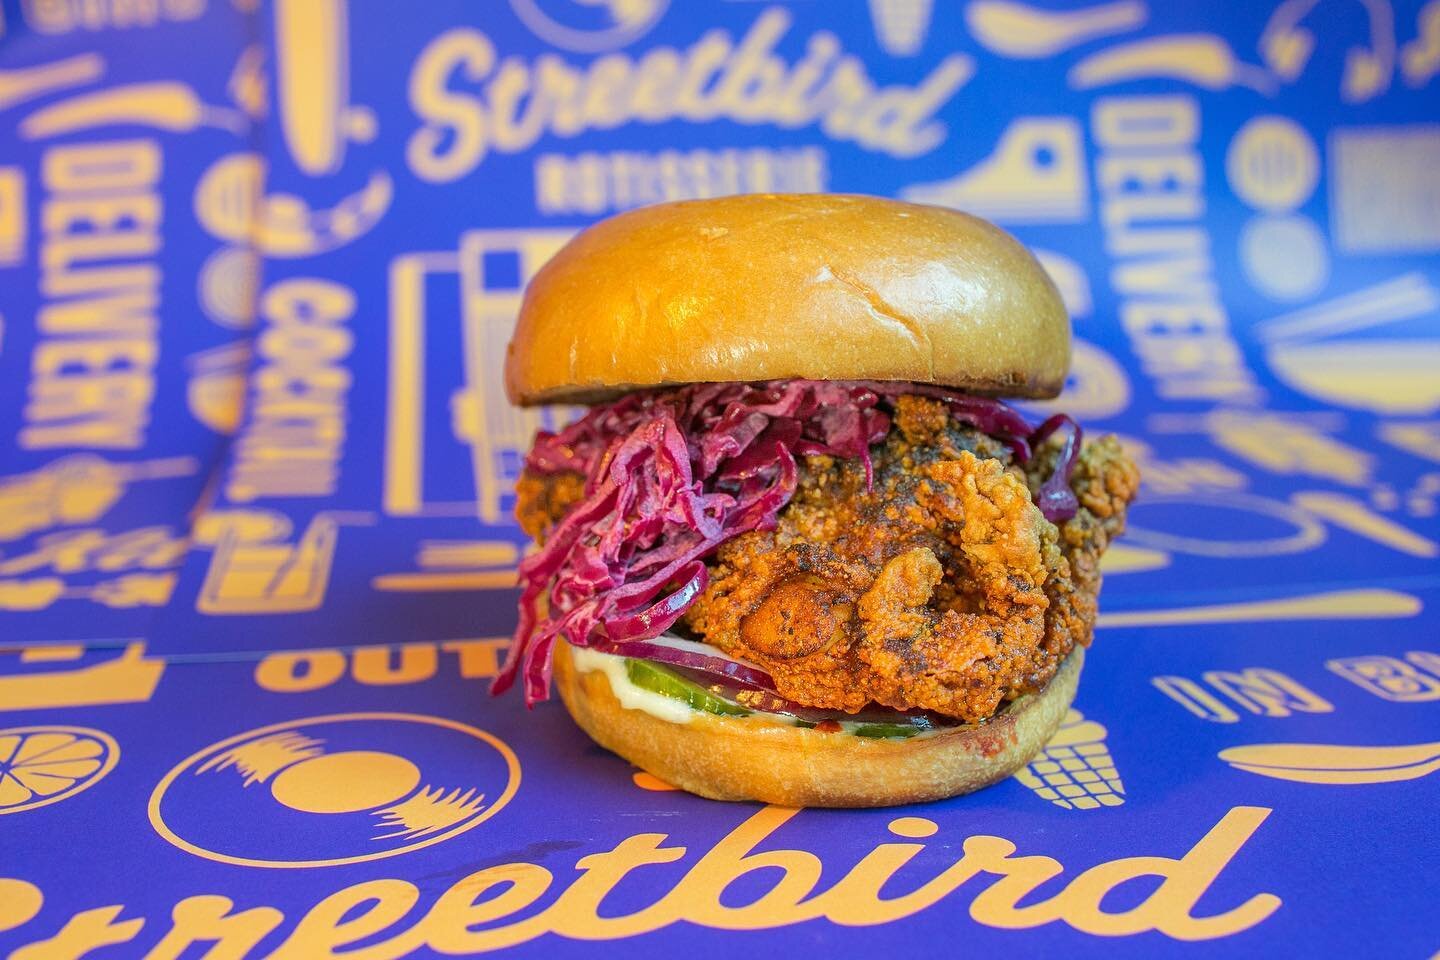 It's one of our favorite holidays today - #NationalFriedChickenDay! From @yankeestadium to the Las Vegas strip to the sandy beach at @bahamarresorts, we love serving up our iconic fried chicken! #streetbirdnyc #friedchicken #friedchickensandwich #fri